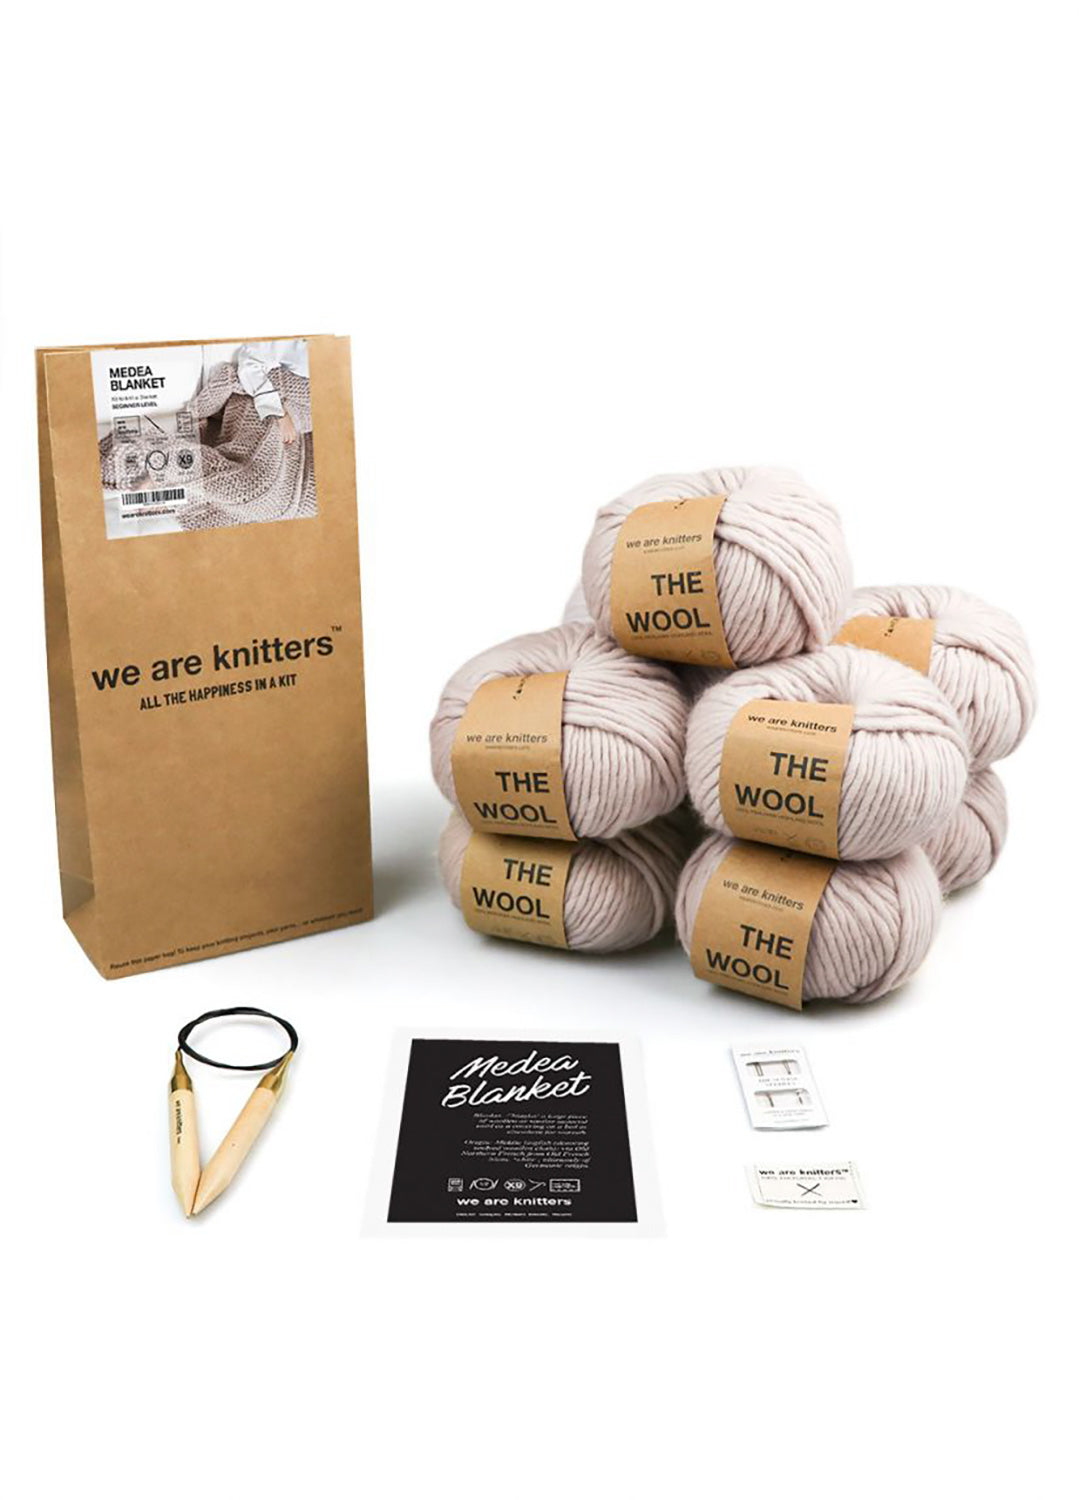 Kit Mindful Making Tricot - Ma couverture Cosy - Kits et Coffrets Tricot -  Tricot